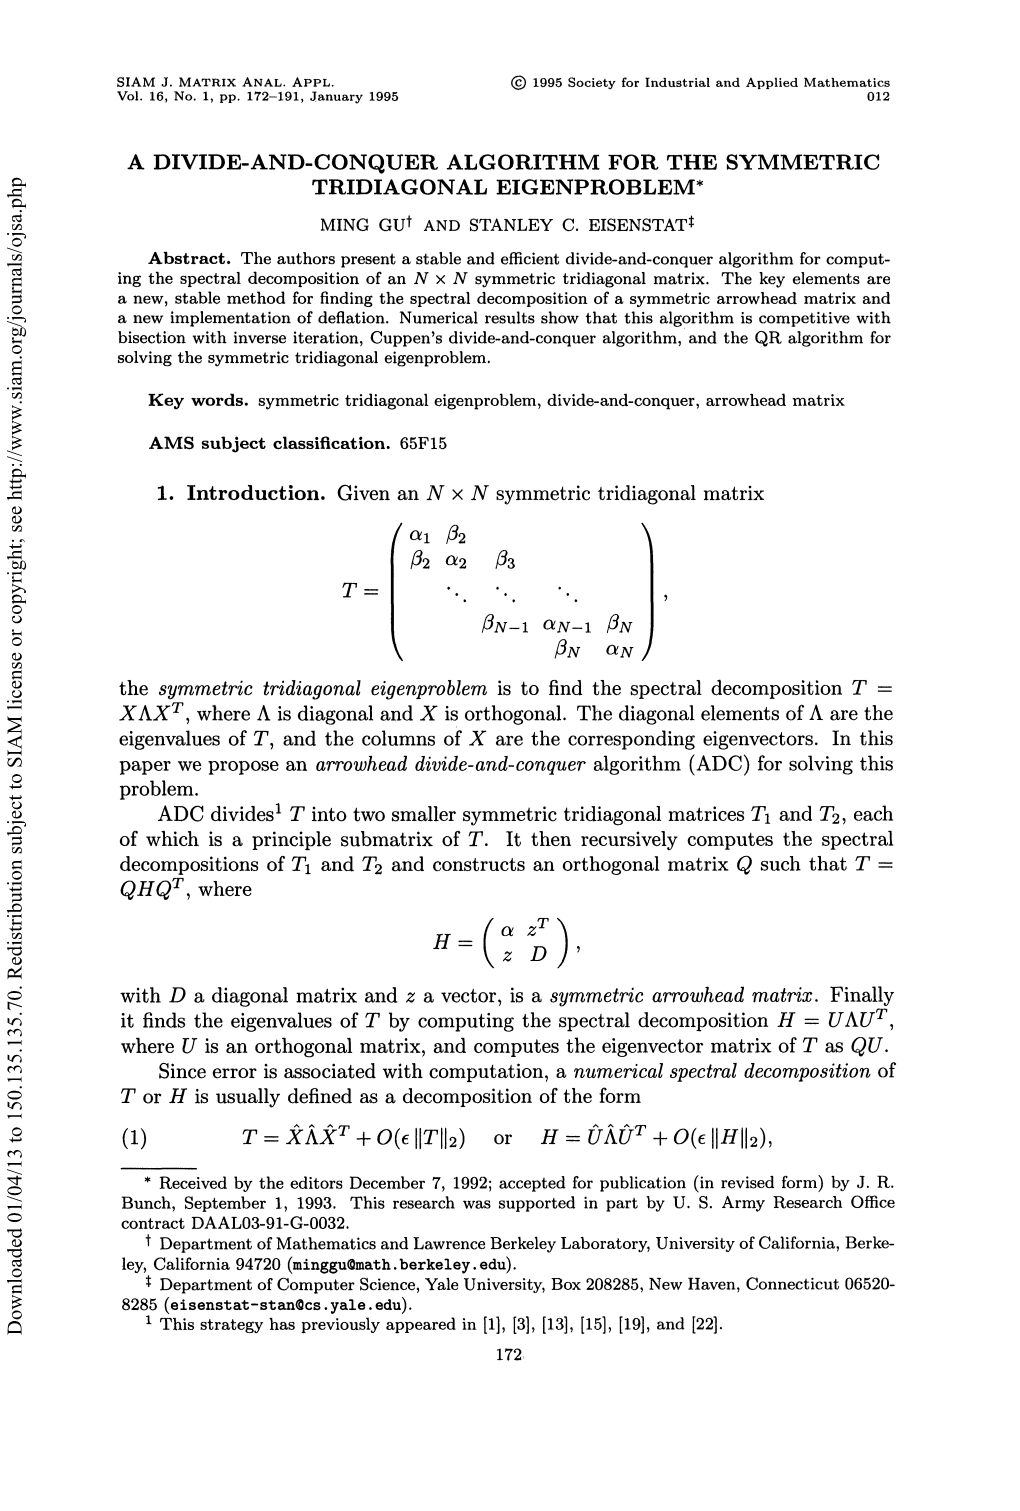 A Divide-And-Conquer Algorithm for the Symmetric Tridiagonal Eigenproblem* Ming Gu and Stanley C